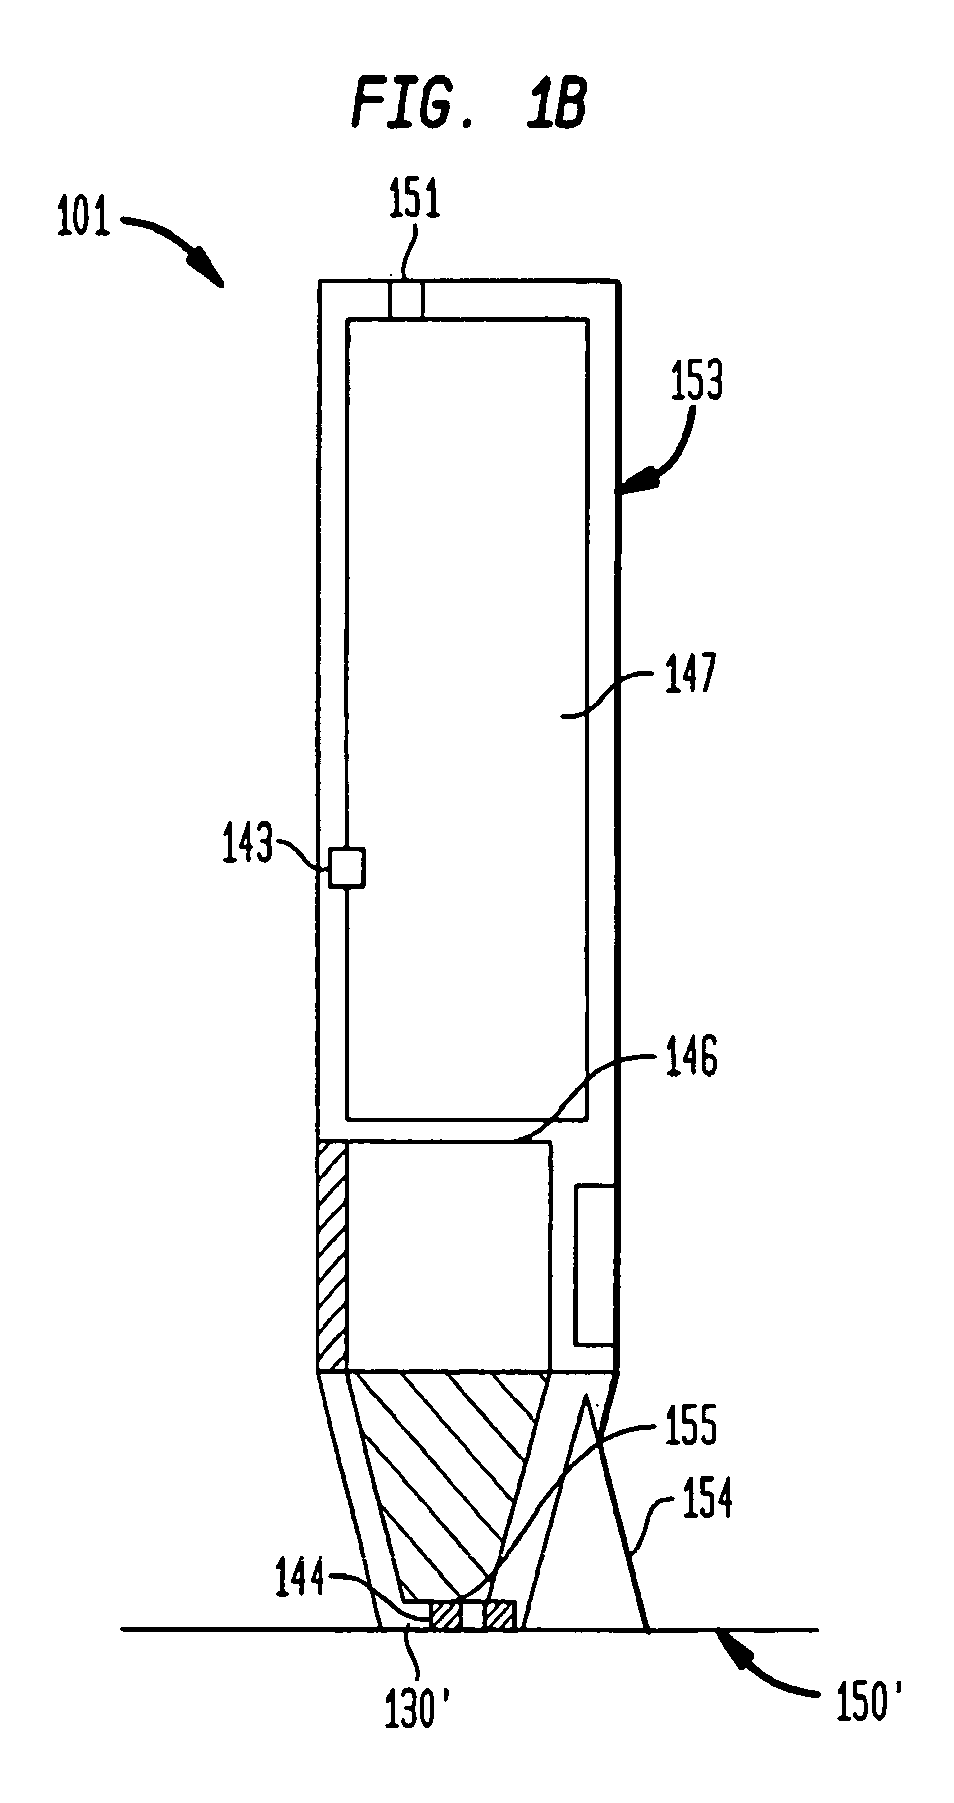 Phototreatment device for use with coolants